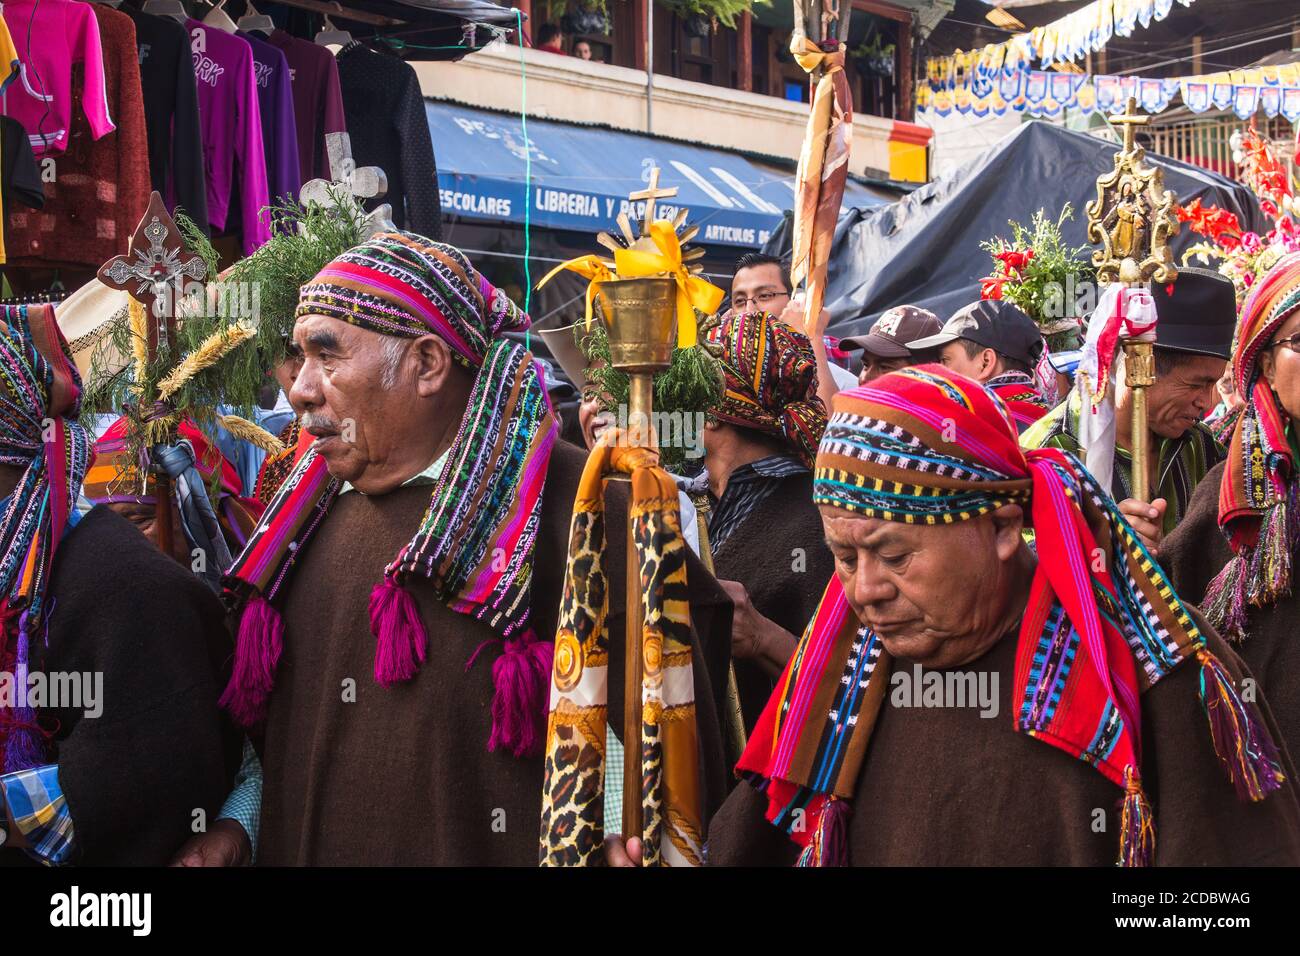 The cofrades or religious officers of the cofradia march in the procession of the FIesta of Santiago in Santiago Atitlan, Guatemala.  They carry their Stock Photo